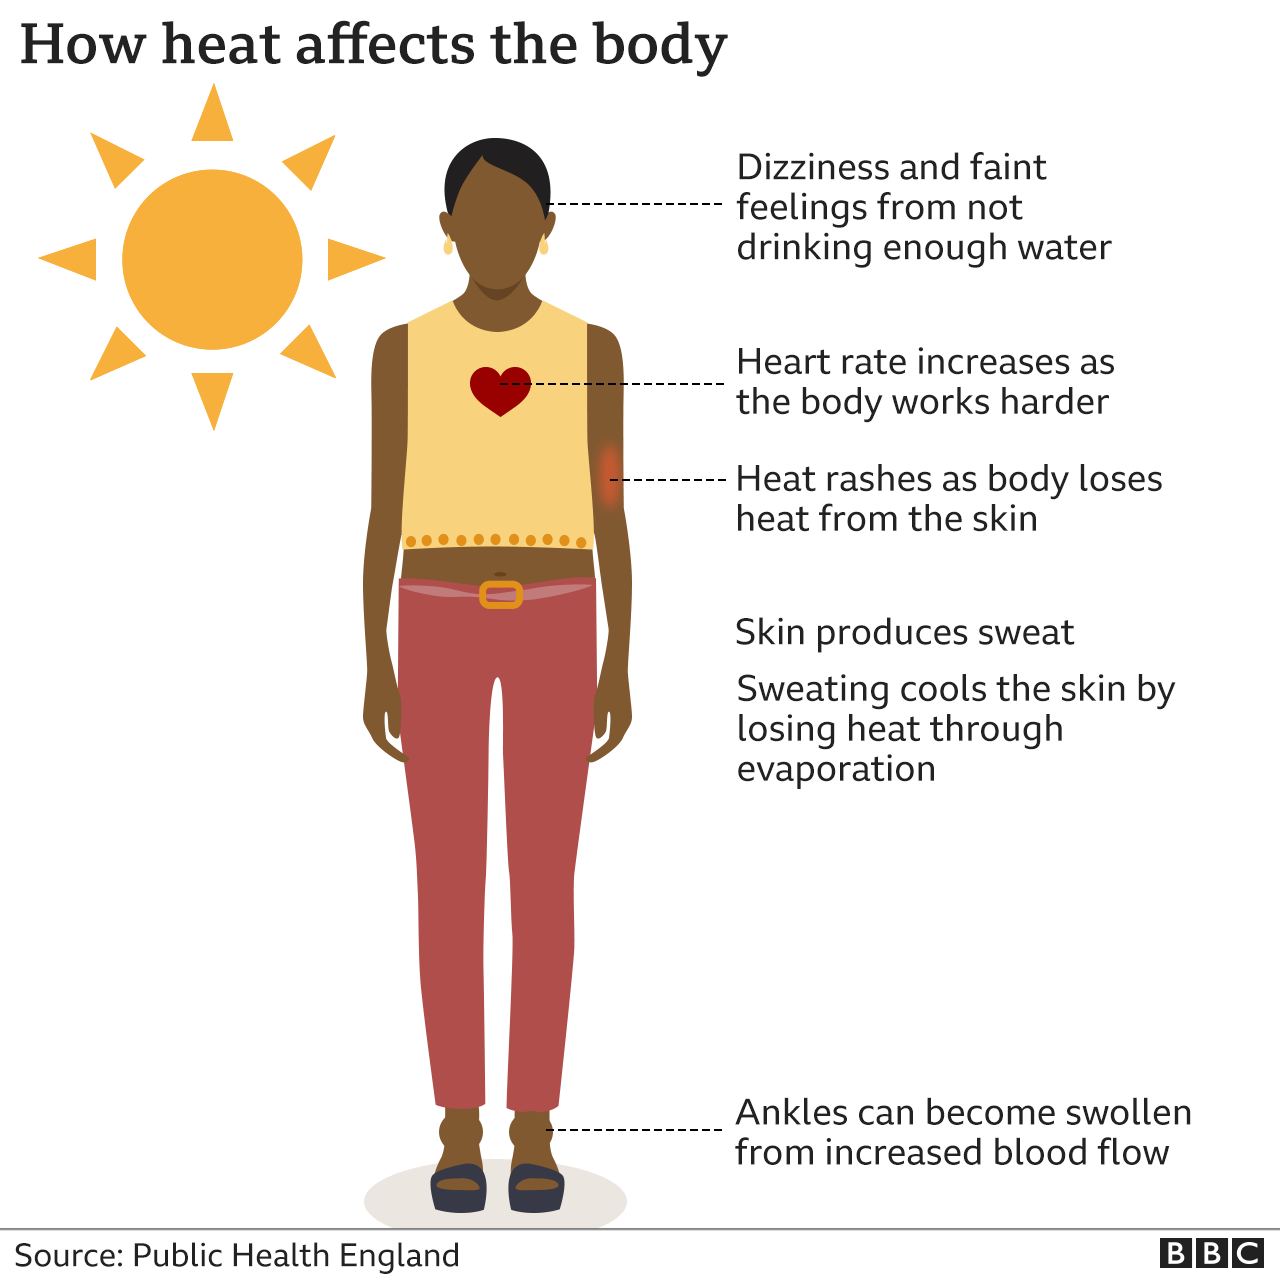 How does heat affect the body?: Fizziness and faint feelings from not enough water; heart rates increases; skin produces sweat; sweating cools the skin by losing heat through evaporation; ankles can become swollen from increased blood flows